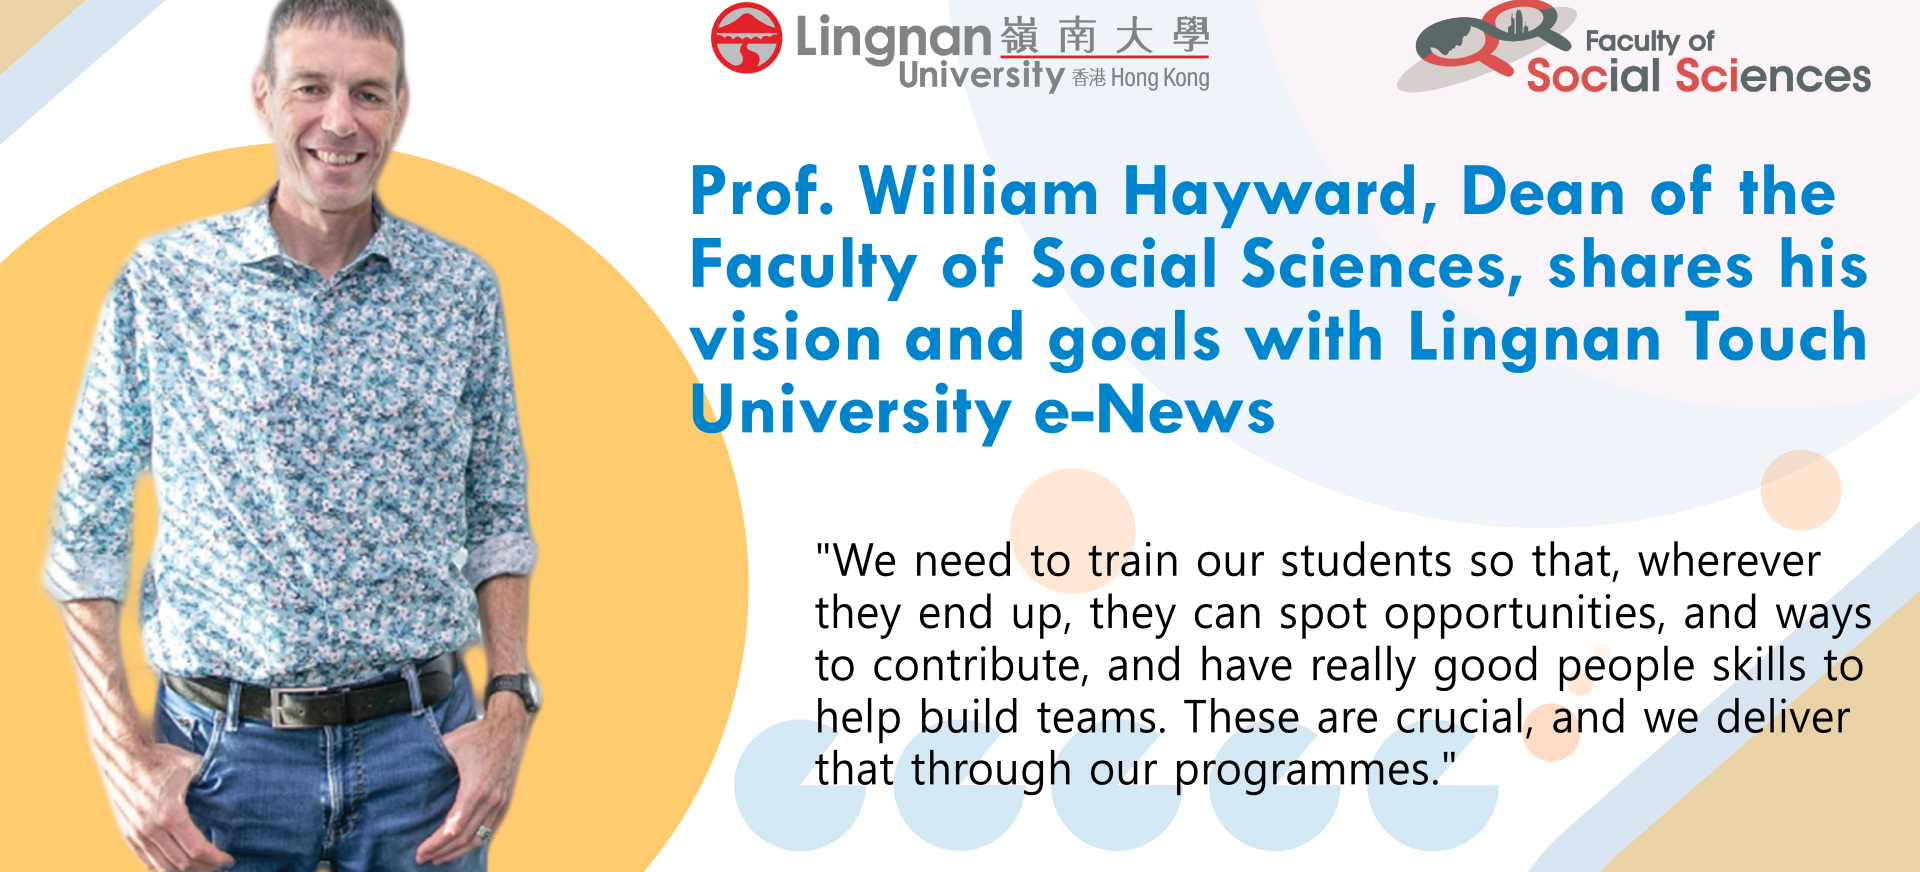 [Dialogue] Prof William Hayward shares his vision and goals as Social Sciences Dean